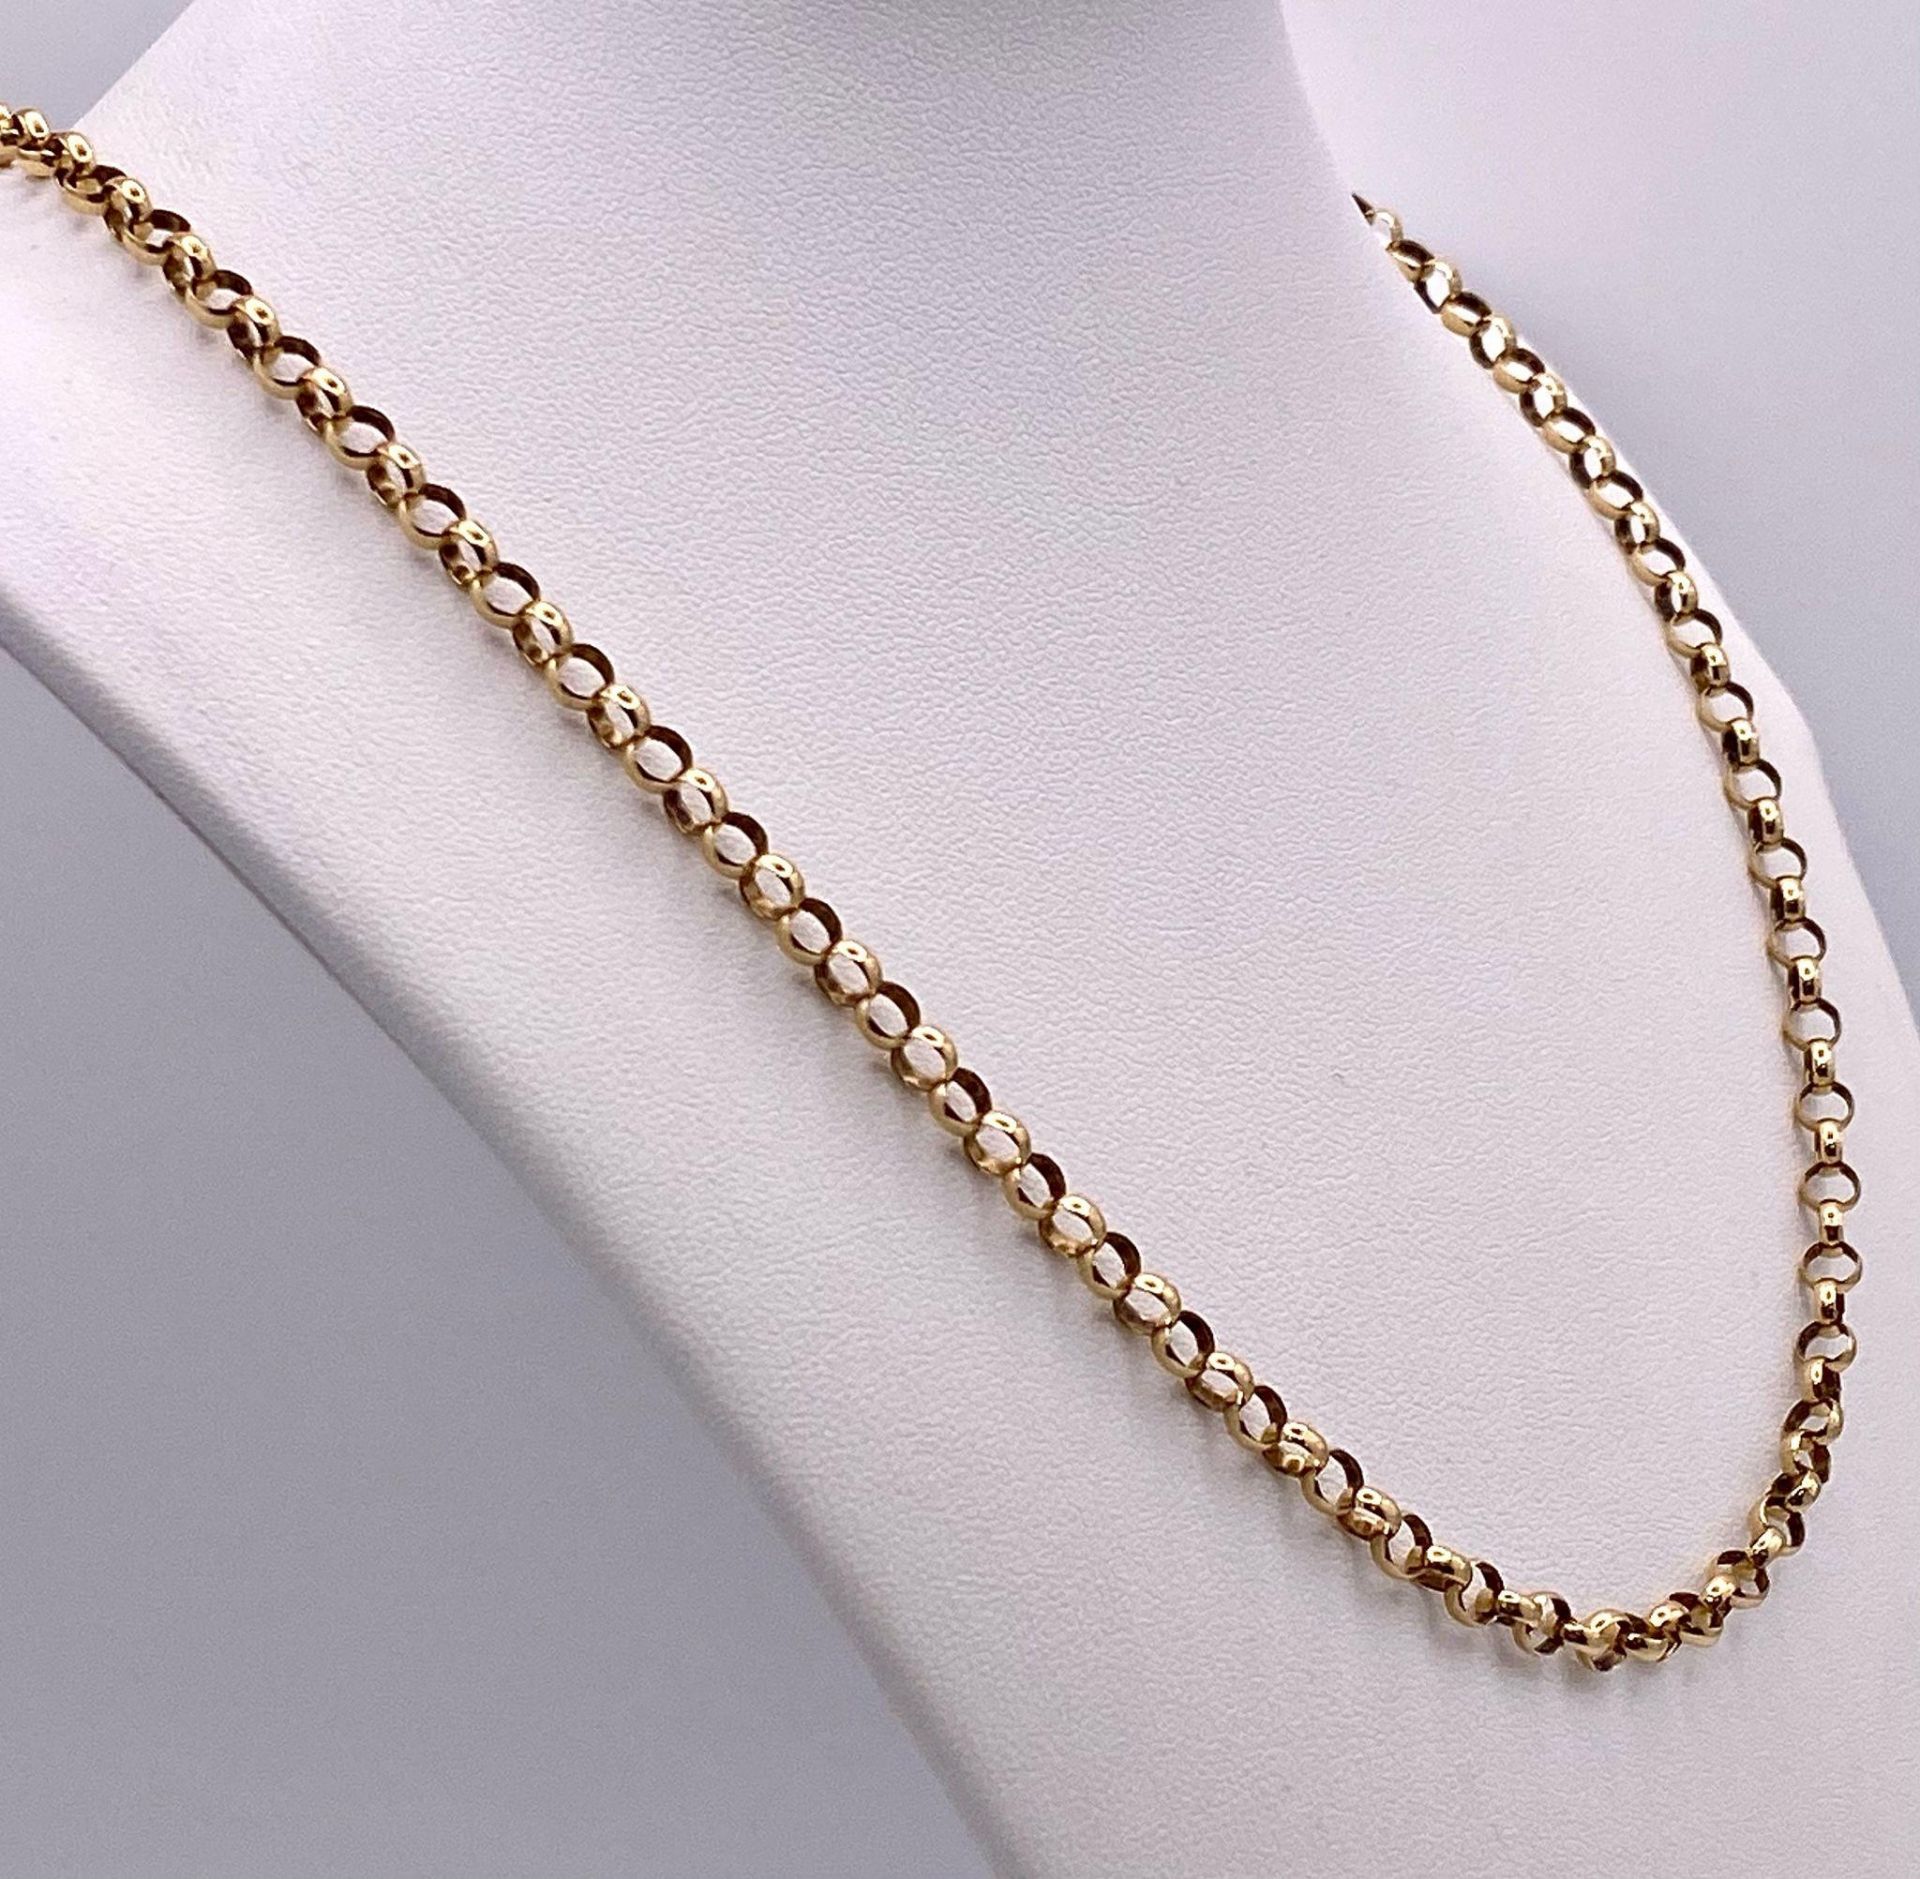 A 14K Yellow Gold Belcher Link Necklace. 52cm length. 11.66g weight. - Image 3 of 5